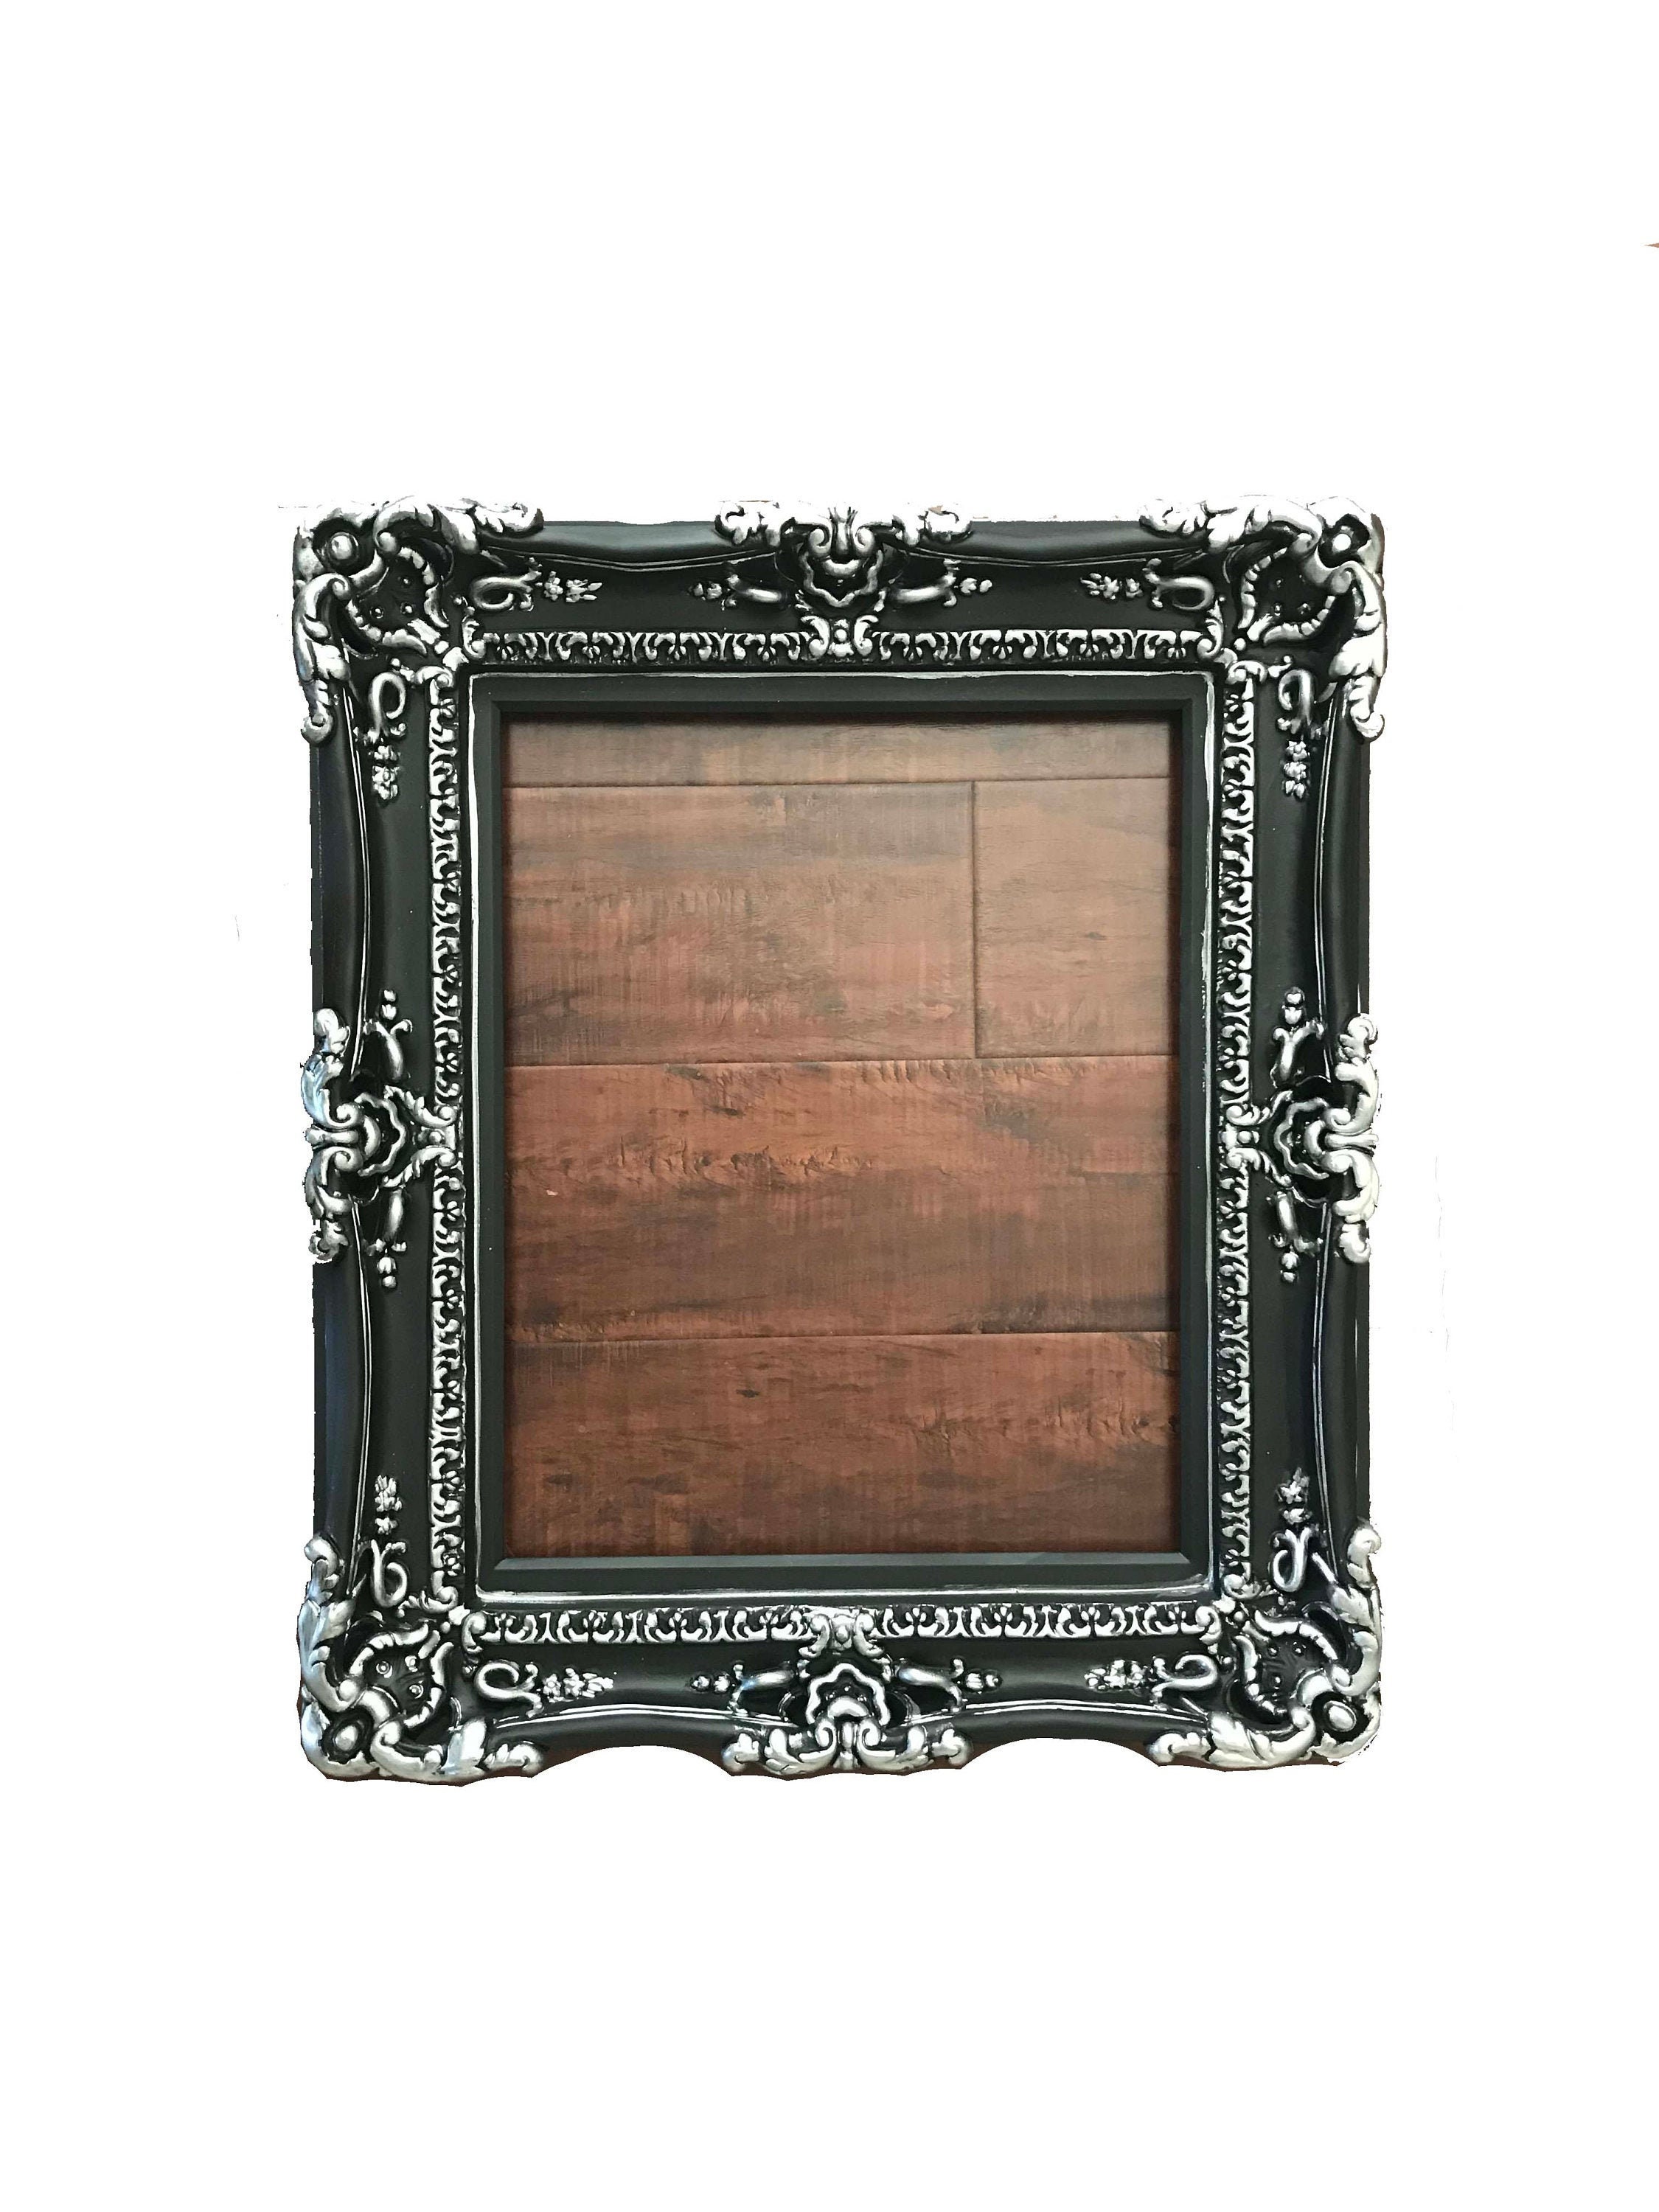 16x20 Matte Black Picture Frames, Shabby Chic Canvas Frame, Baroque  Decorative French Frame, Ornate Wall Mirror, Wedding Gift Ideas 